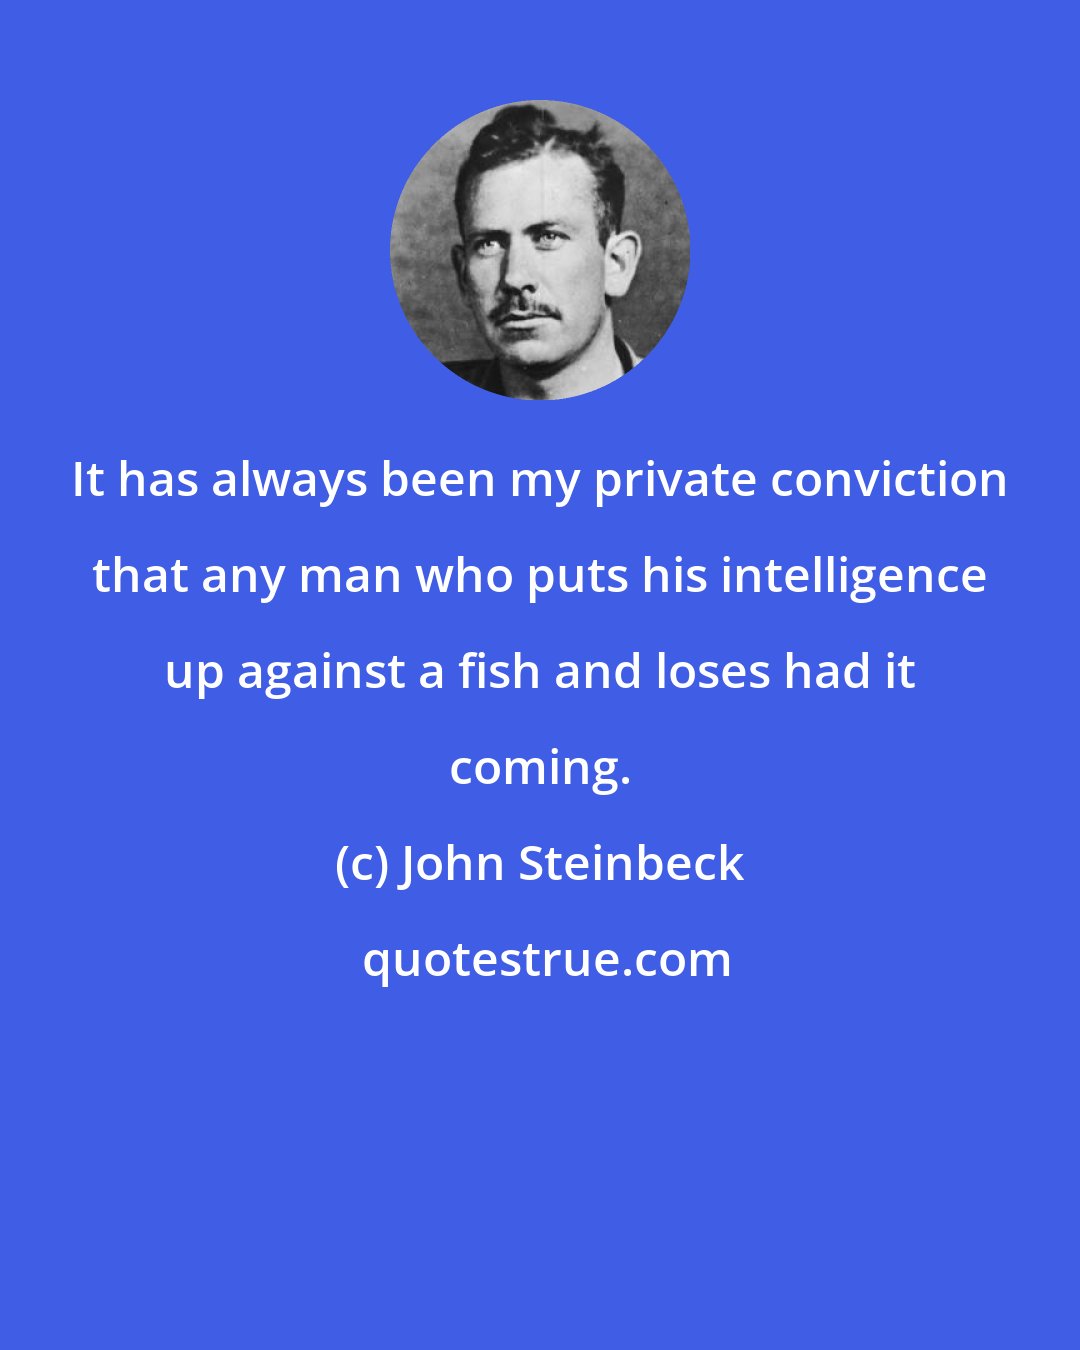 John Steinbeck: It has always been my private conviction that any man who puts his intelligence up against a fish and loses had it coming.